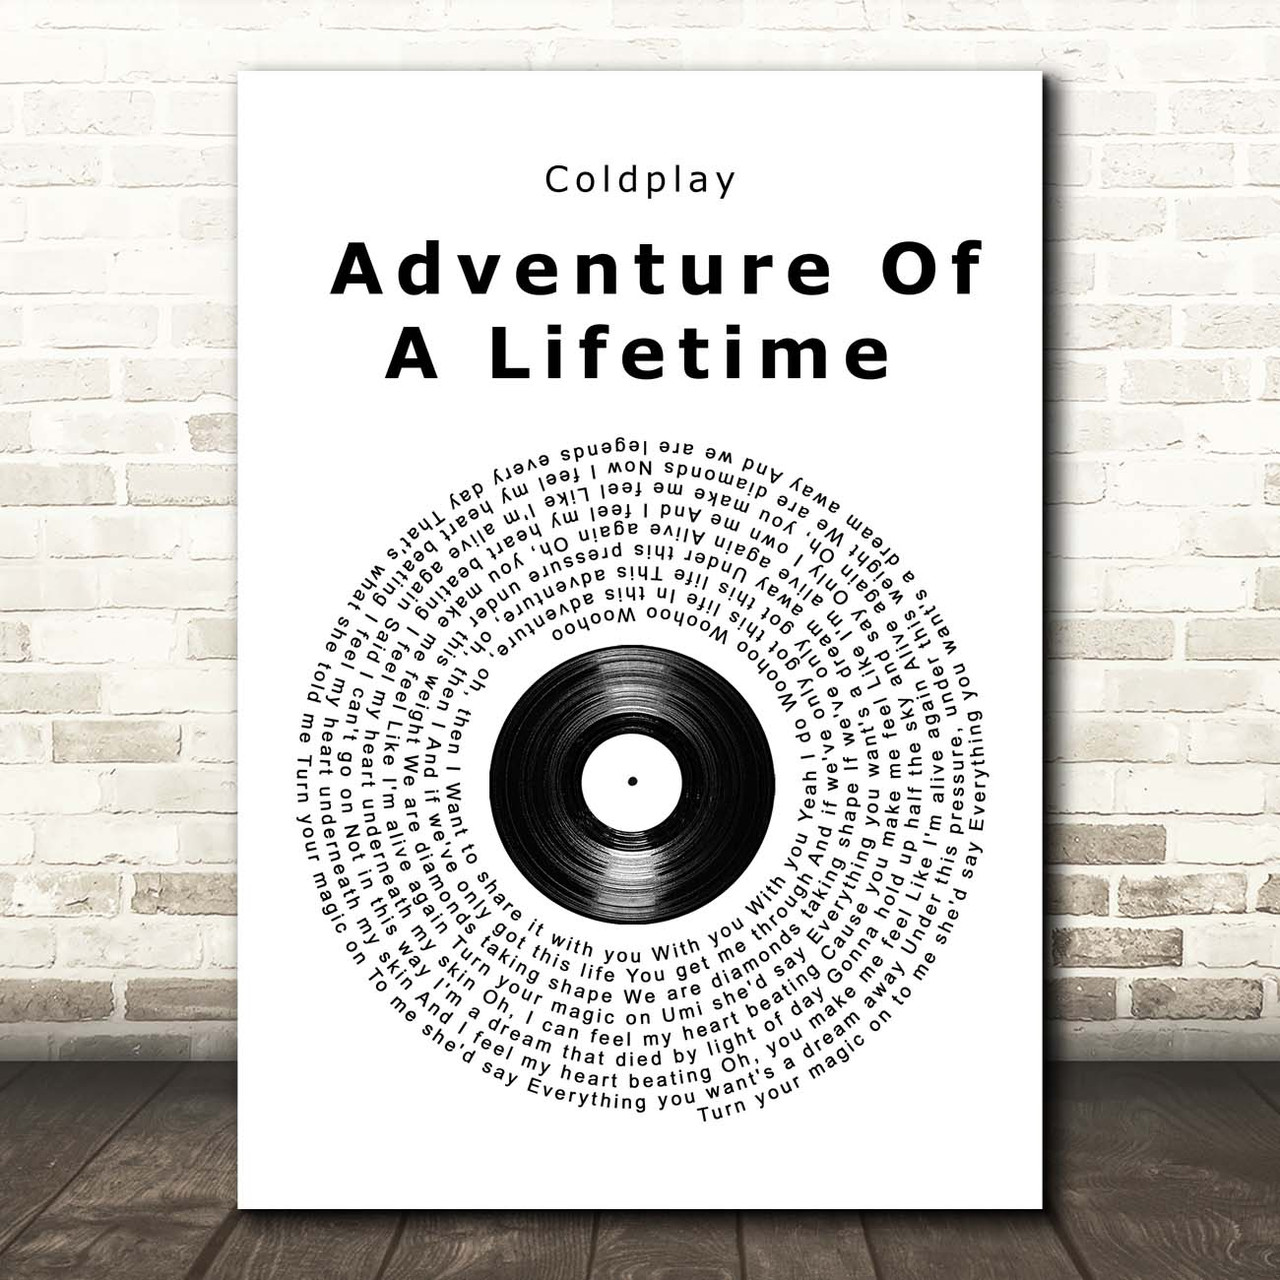 Coldplay Adventure Of A Lifetime Vinyl Record Song Lyric Print - Red Heart  Print